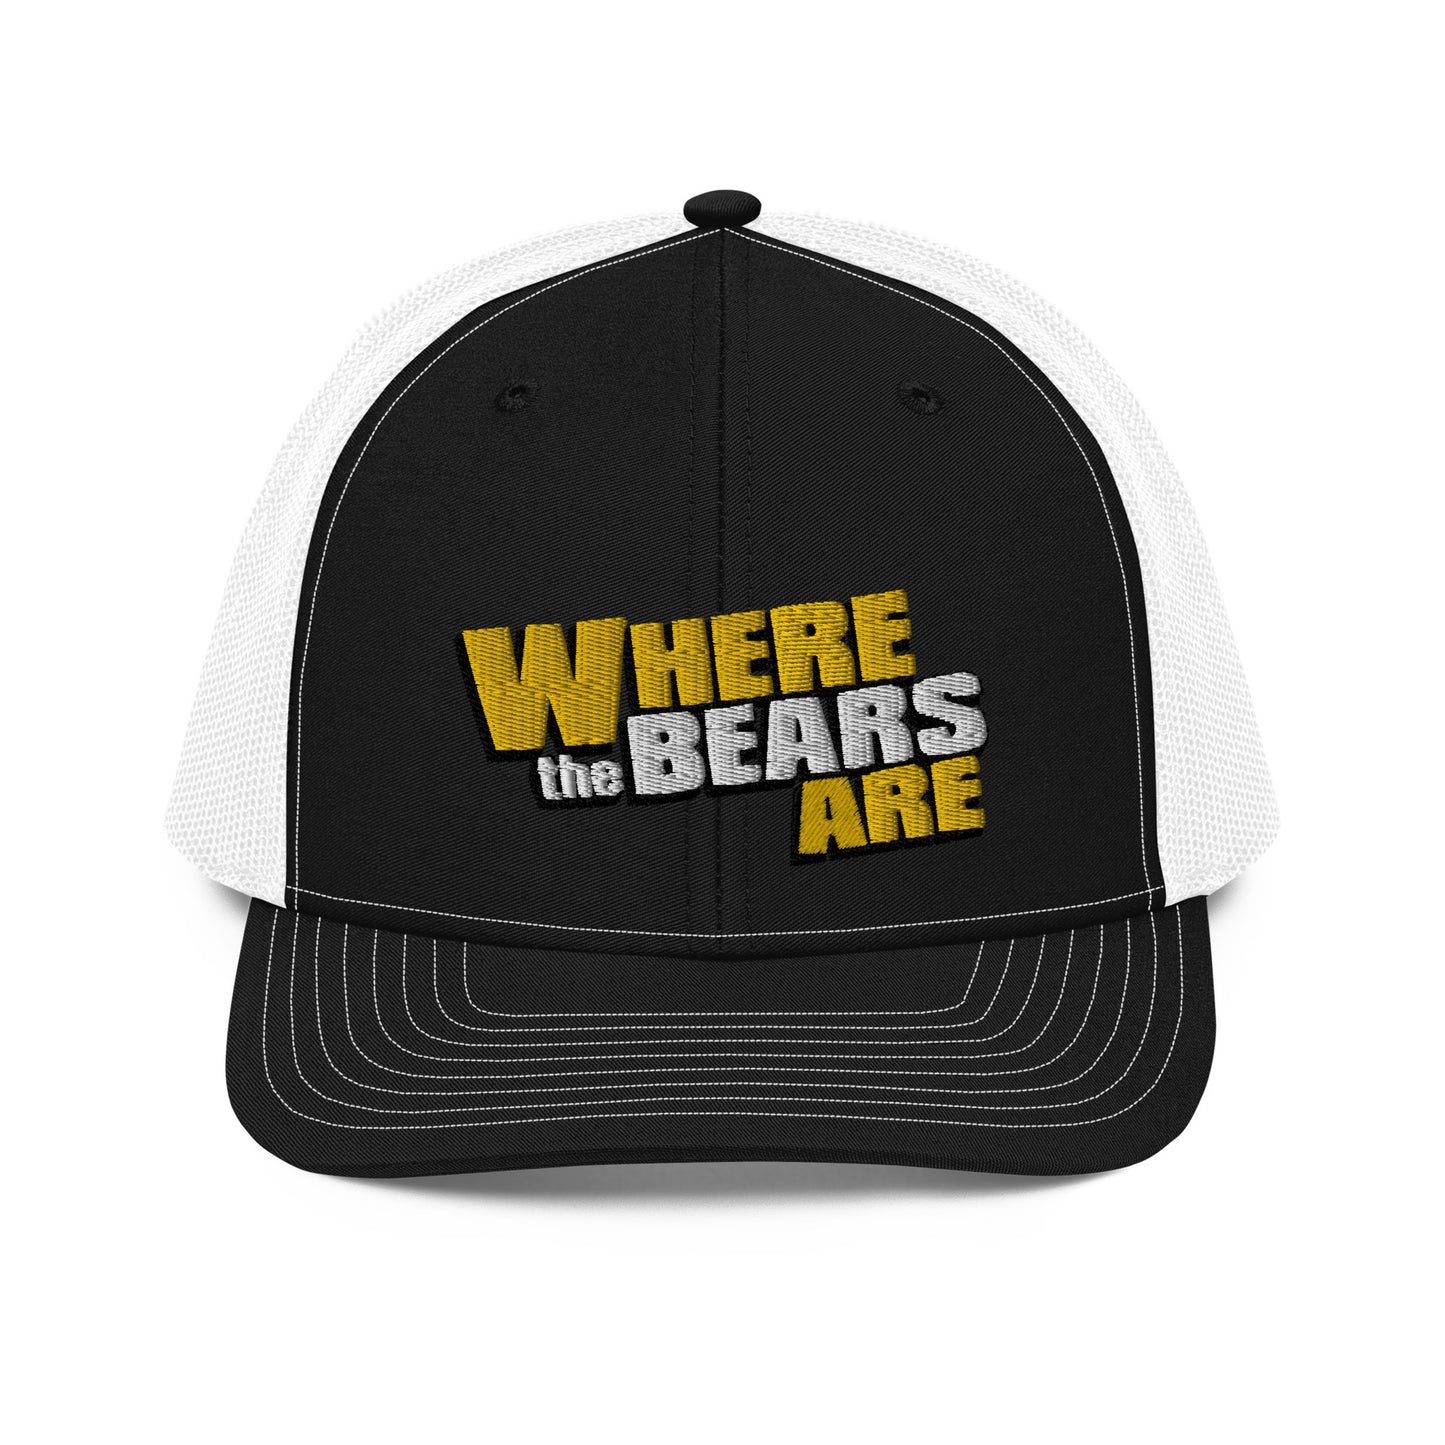 'Where The Bears Are' Logo Embroidered Trucker Cap